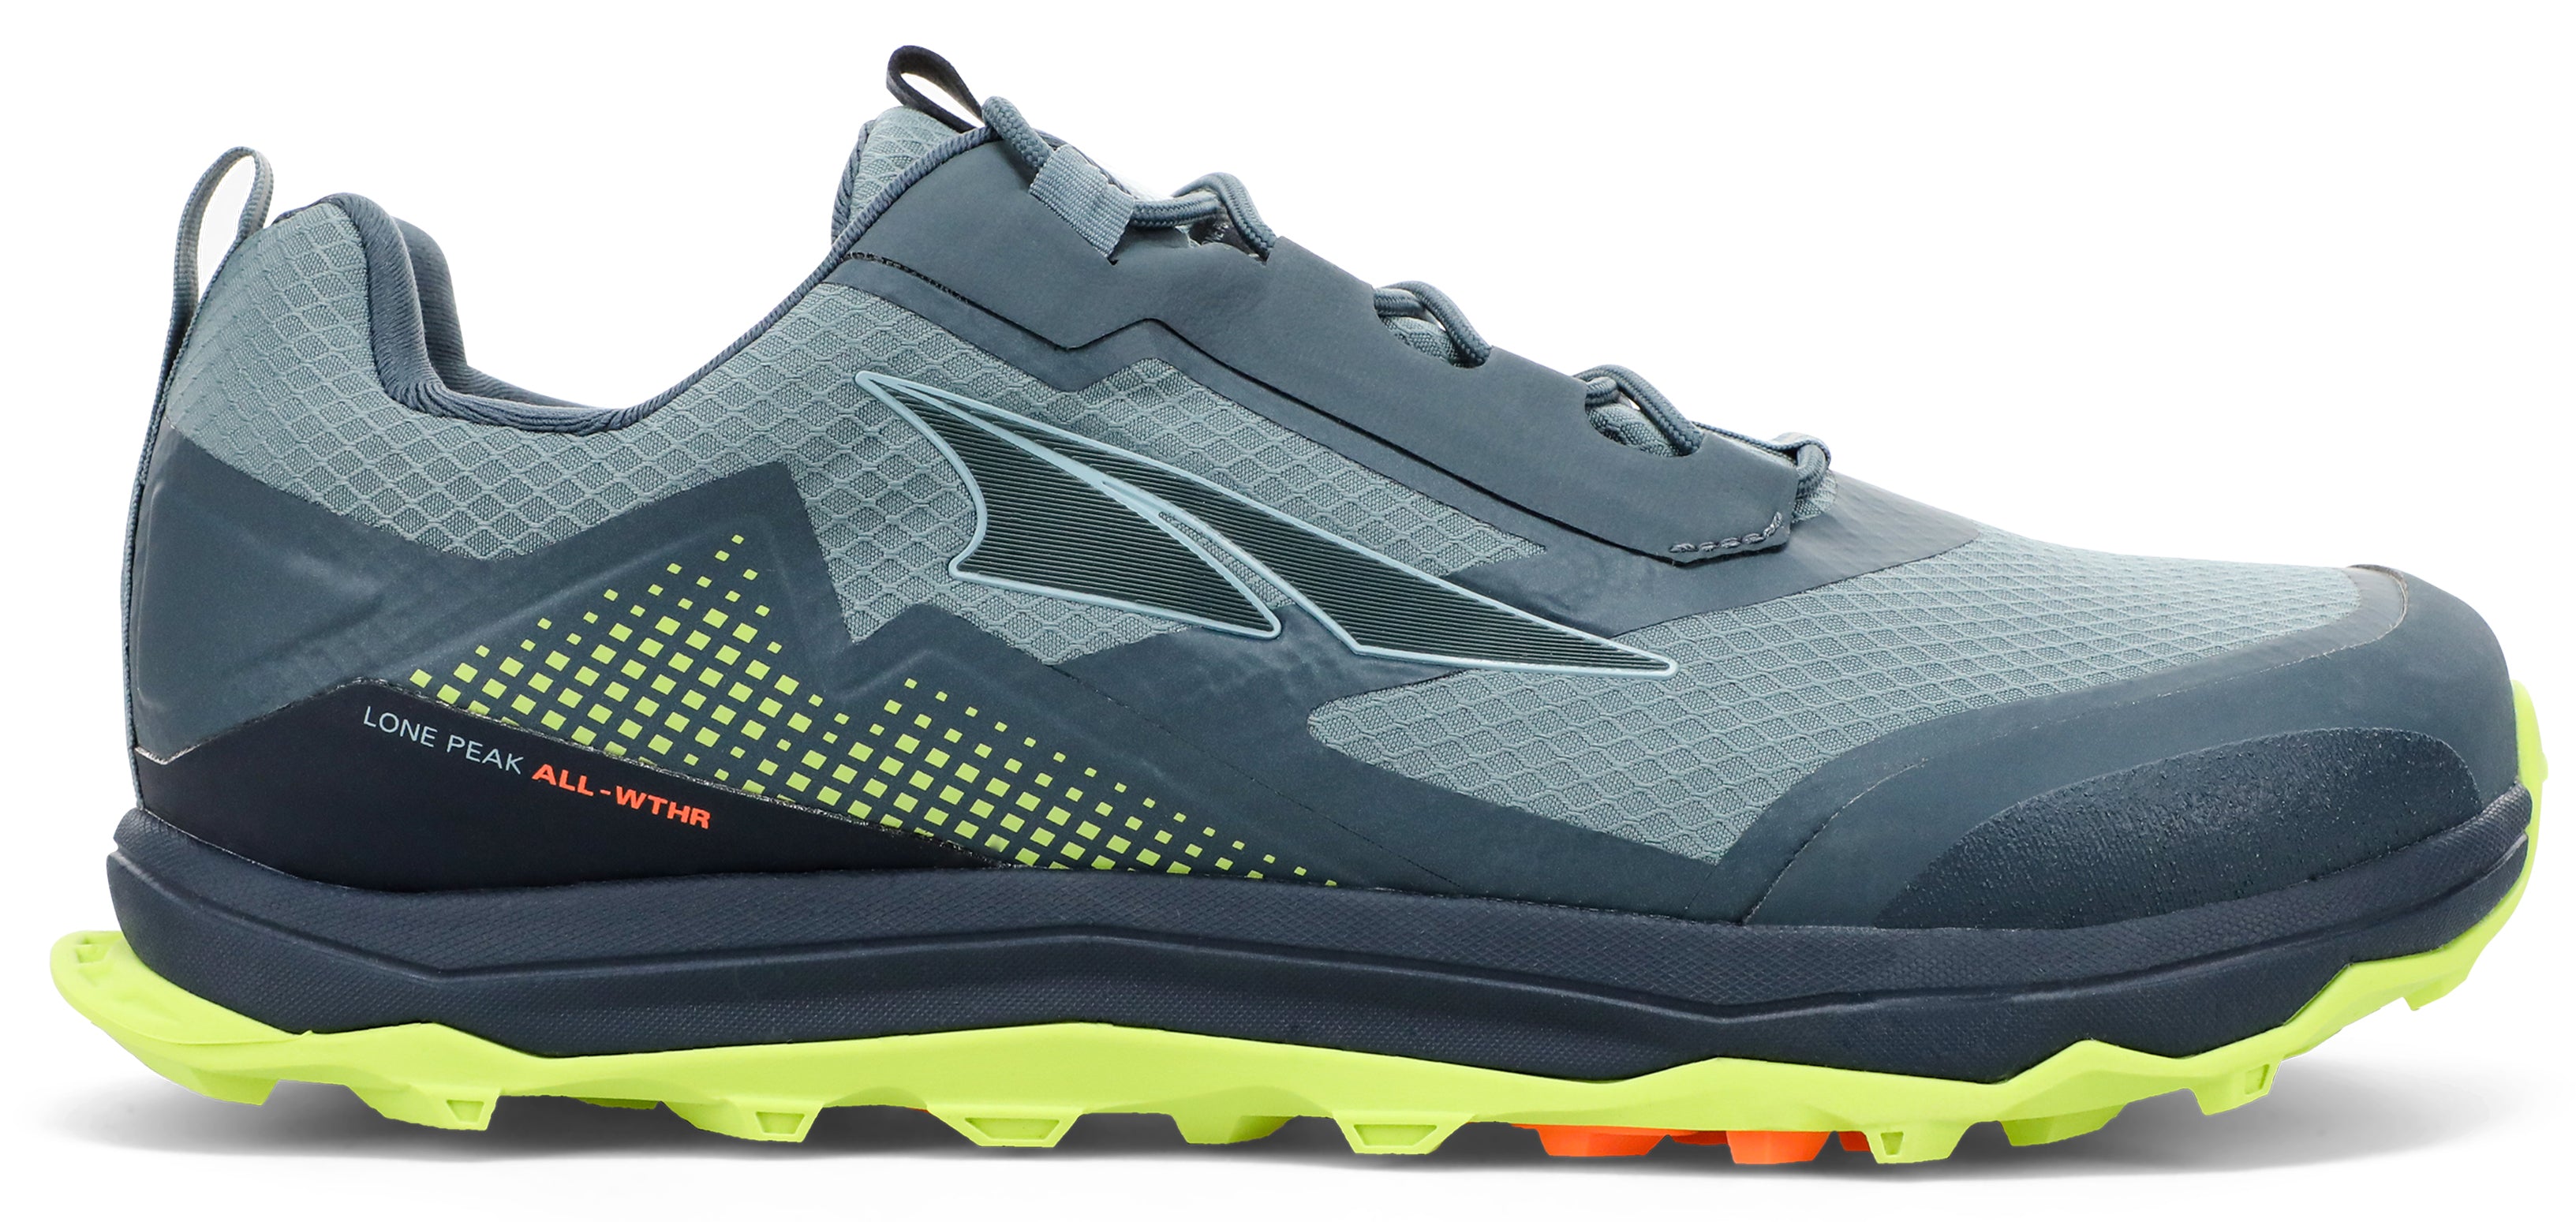 Altra Men's Lone Peak ALL-WTHR Low Trail Running Shoe in Gray/Lime from the side